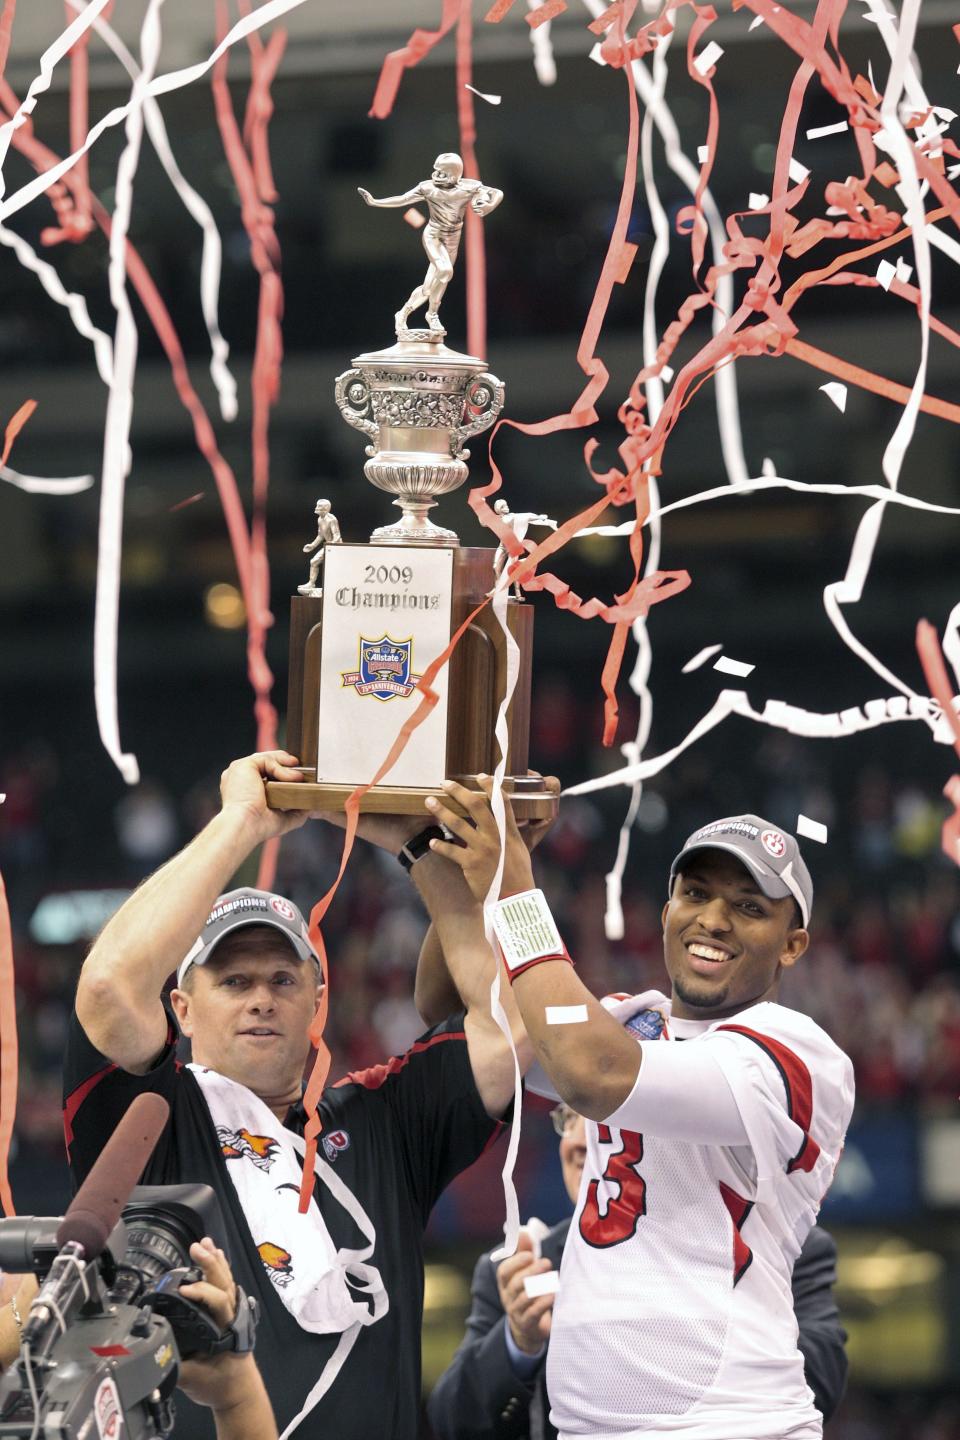 Utah coach Kyle Wittingham and quarterback Brian Johnson hold up the Sugar Bowl championship trophy after an NCAA football game in the Sugar Bowl in New Orleans, Friday, Jan. 2, 2009. Utah defeated Alabama 31-17. | Dave Martin, Associated Press